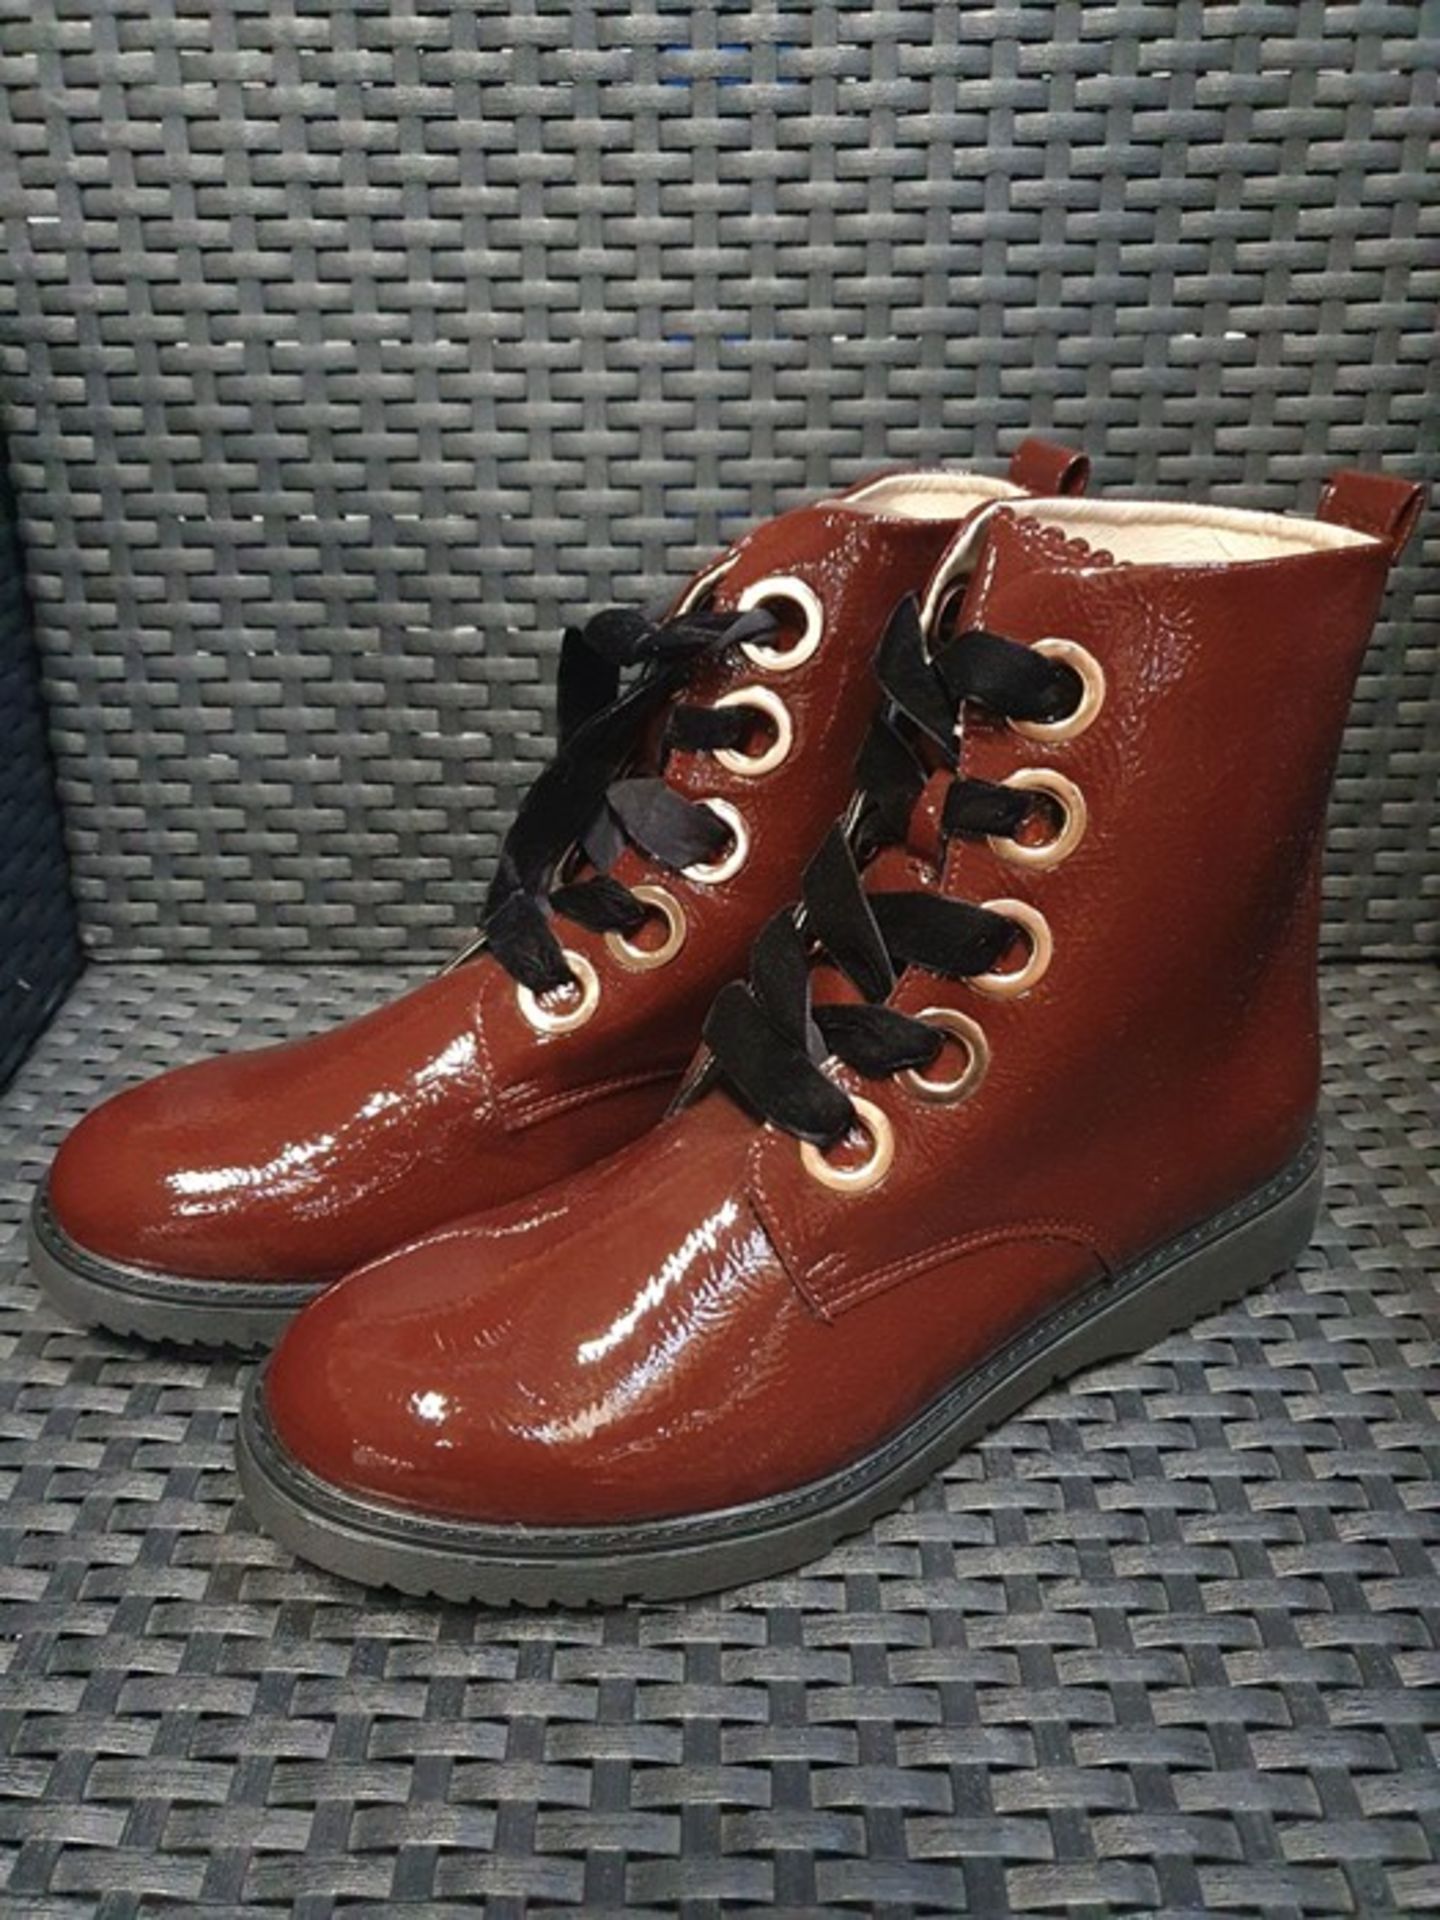 ONE PAIR OF LACQUERED LACE-UP ANKLE BOOTS WITH GOLDEN EYELETS IN BURGUNDY - SIZE 8.5. RRP £58.00.